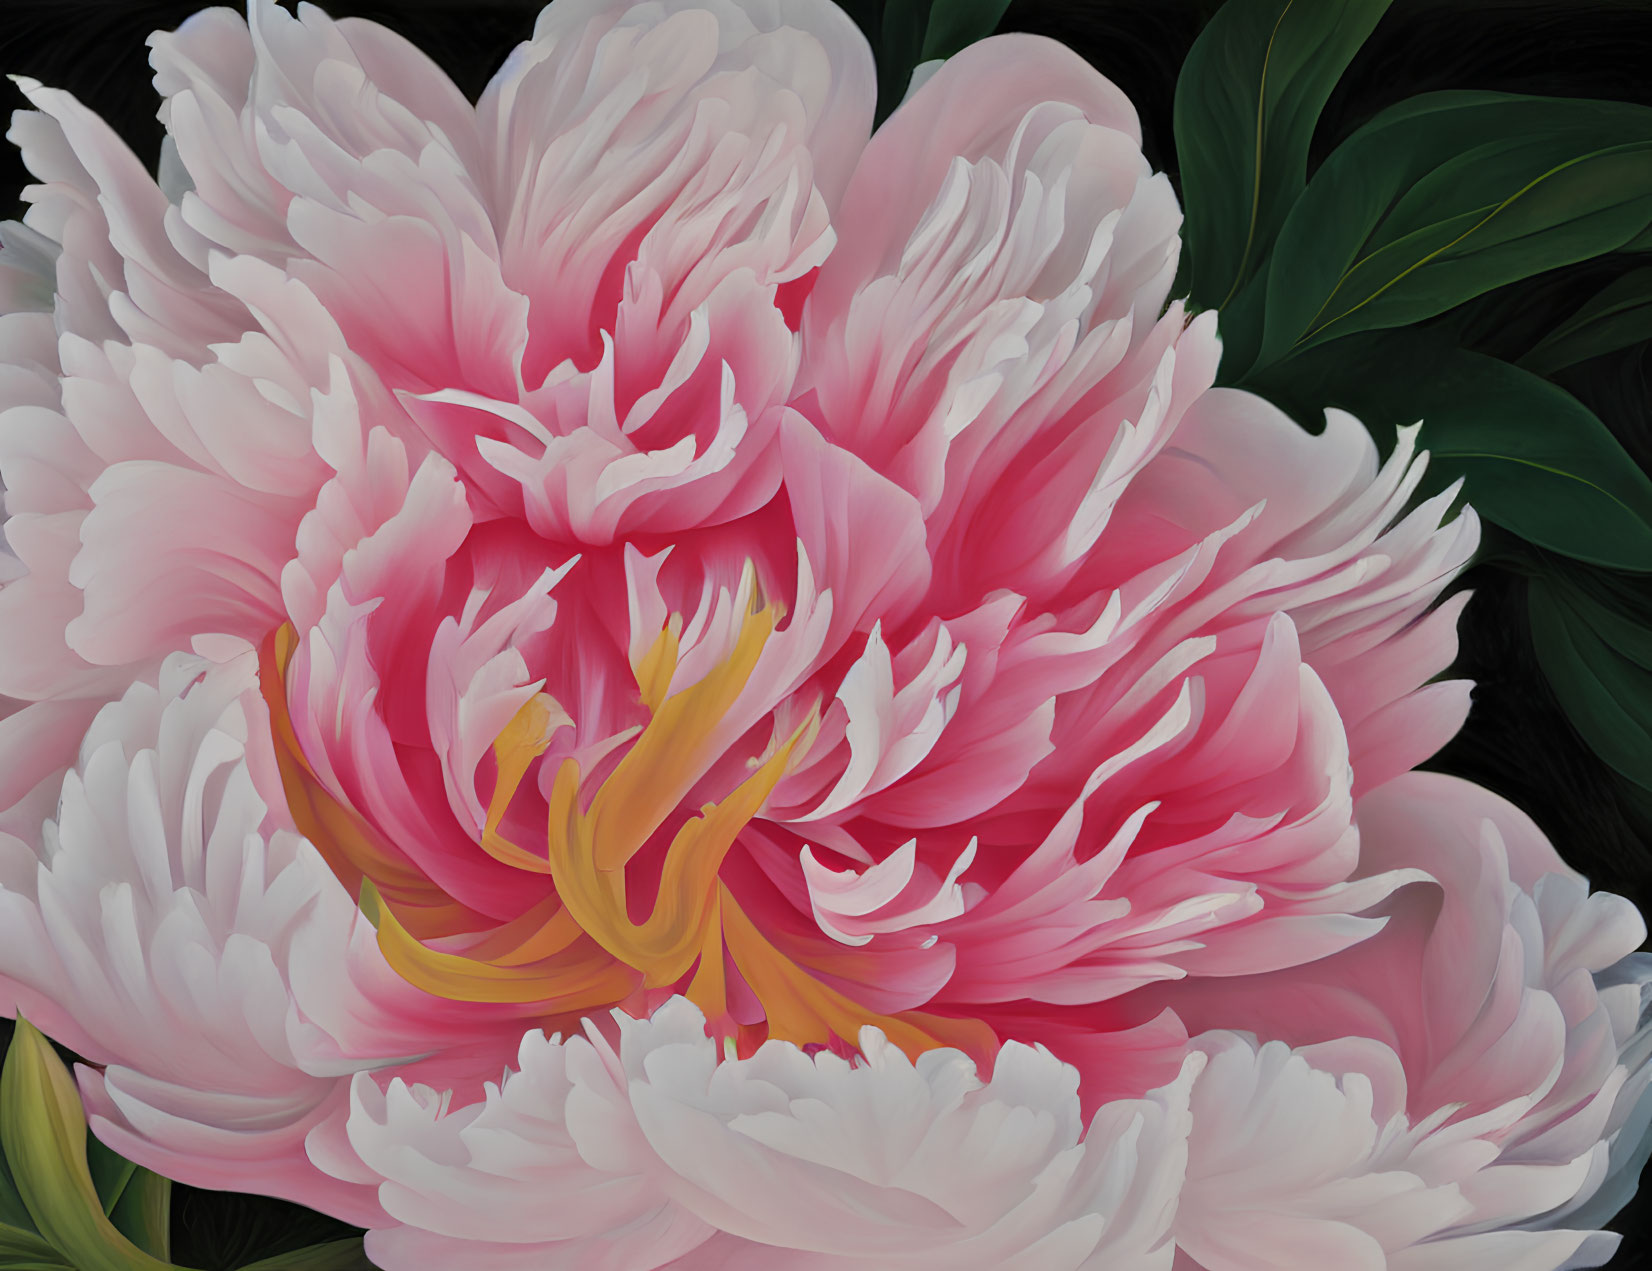 Detailed Close-Up of Lush Pink Peony and Dark Green Leaves